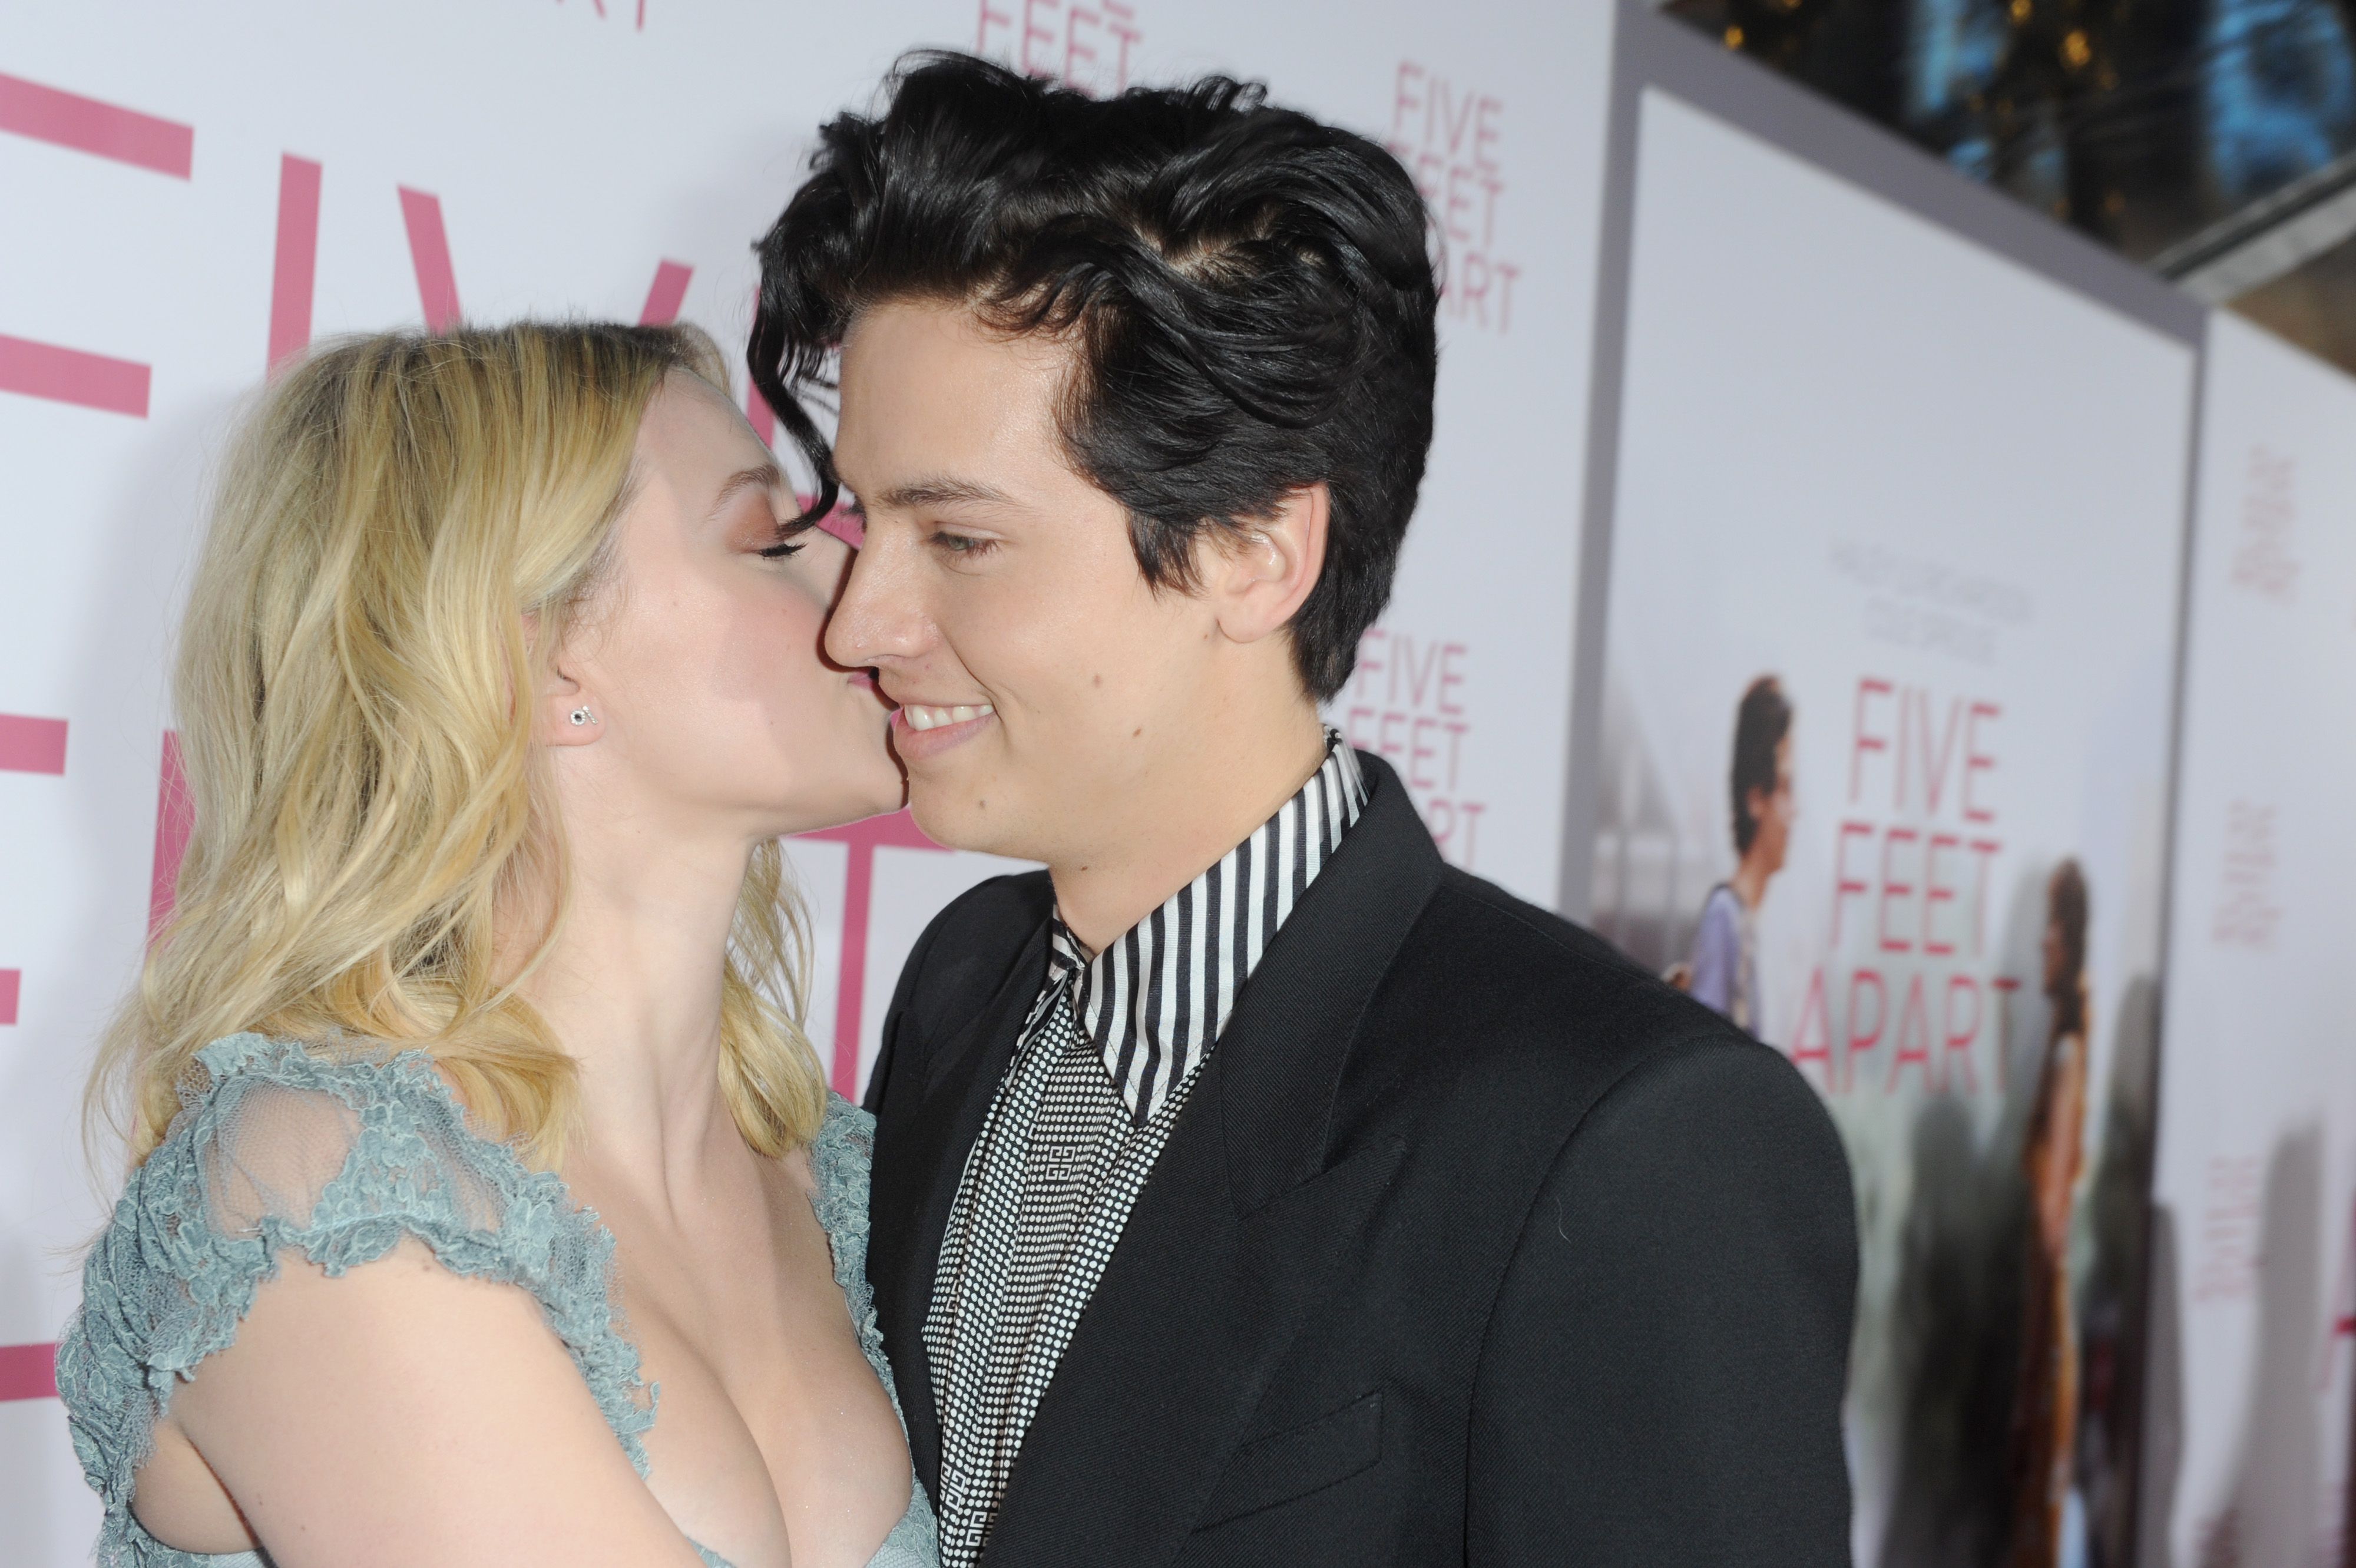 Leeli Lax Sex Video - Cole Sprouse and Lili Reinhart's Complete Relationship Timeline